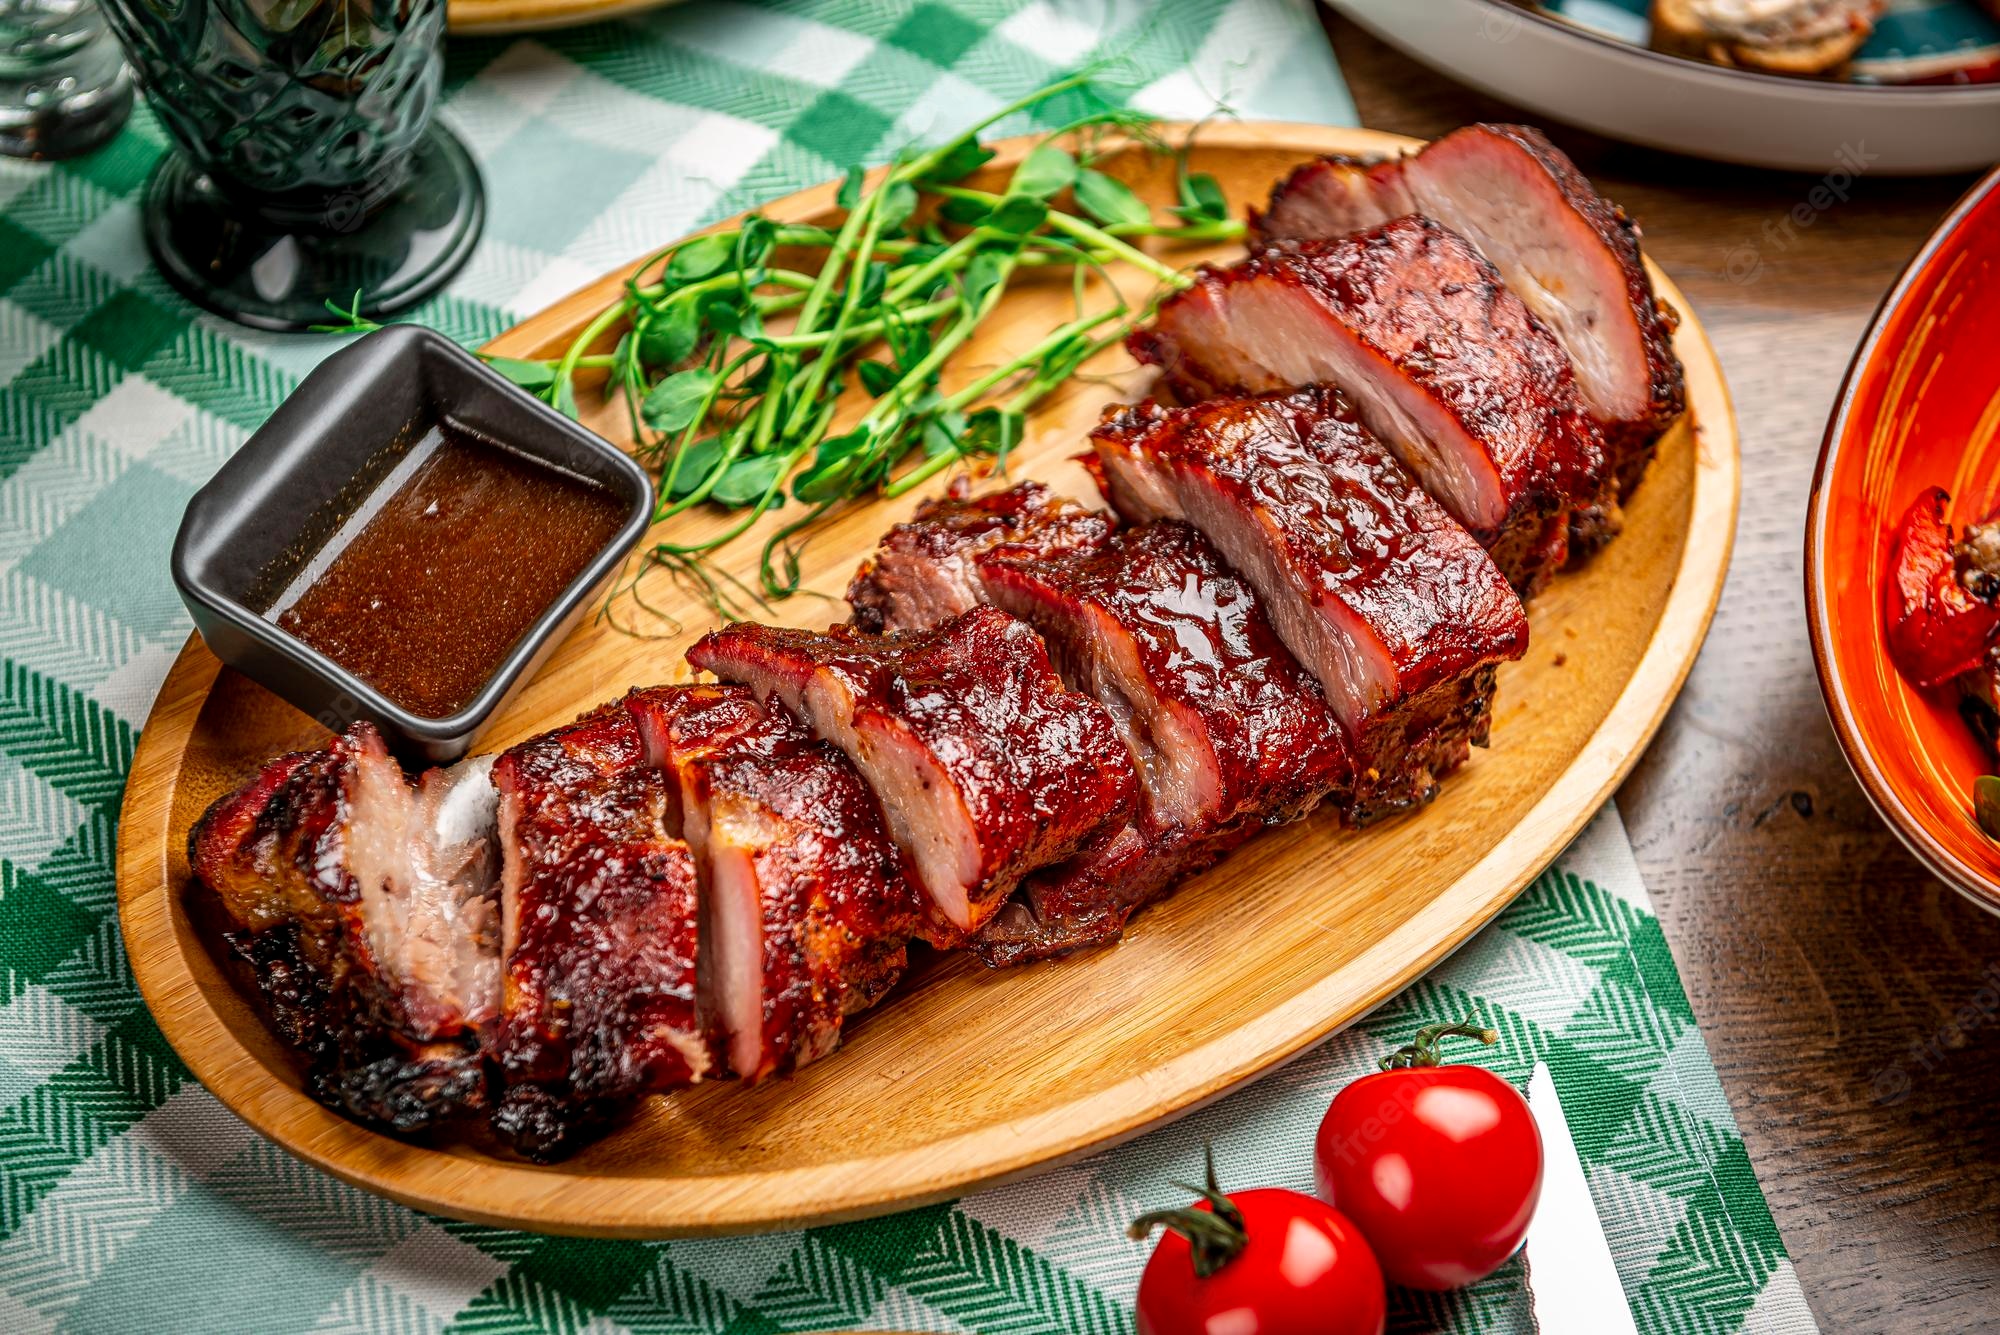 How many ribs are on a slab of baby back ribs